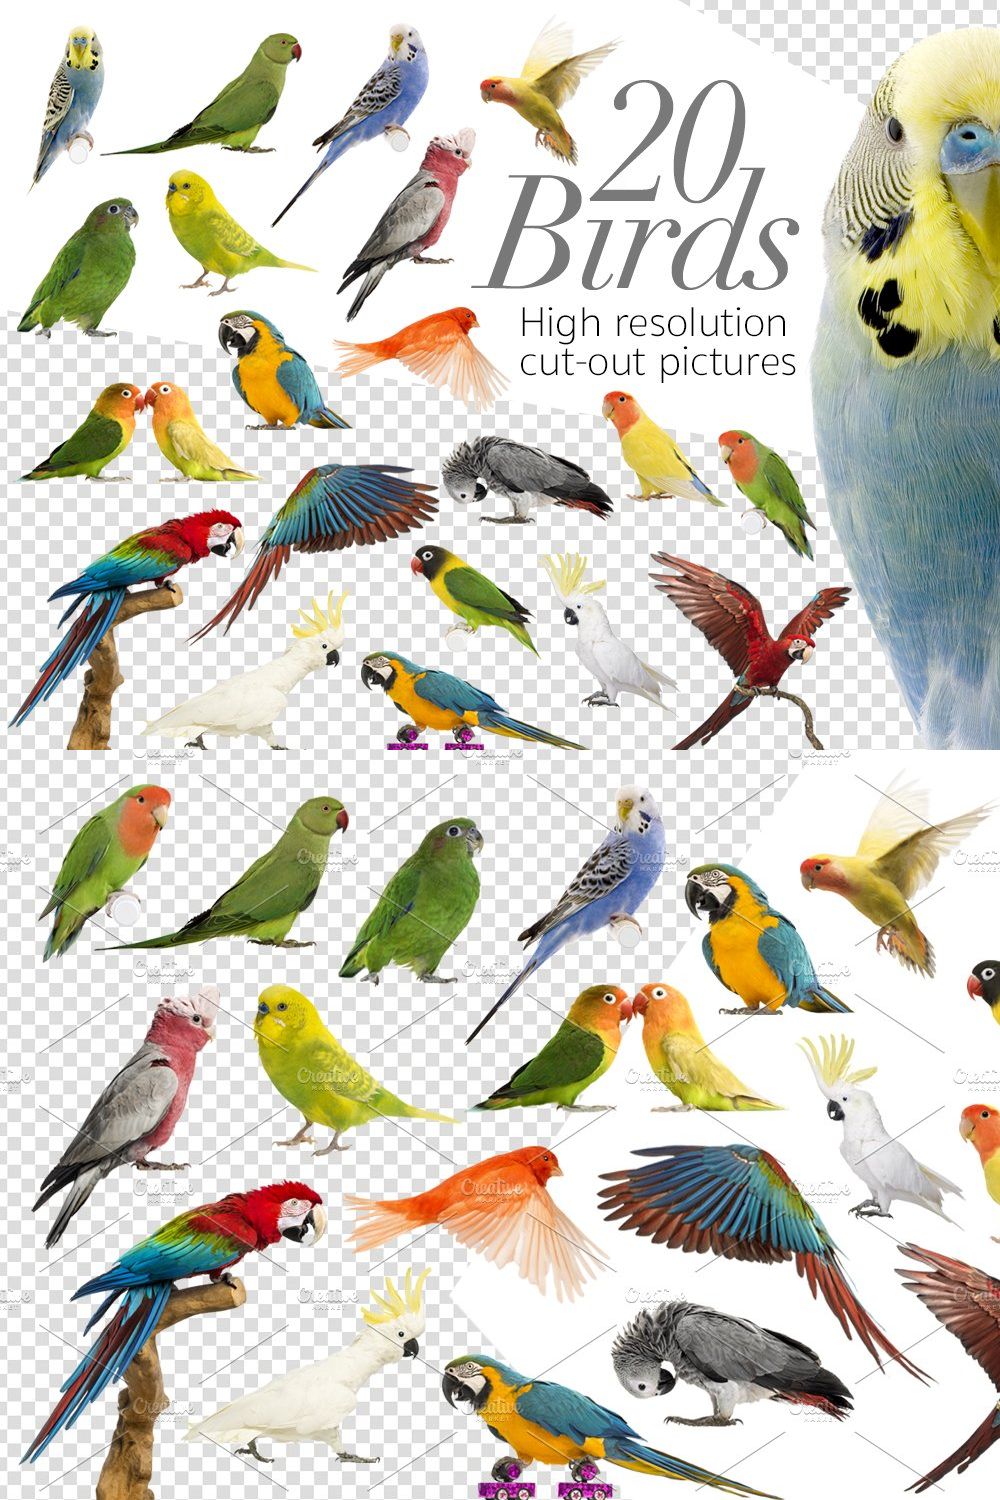 20 Birds - Cut-out High Res Pictures pinterest preview image.